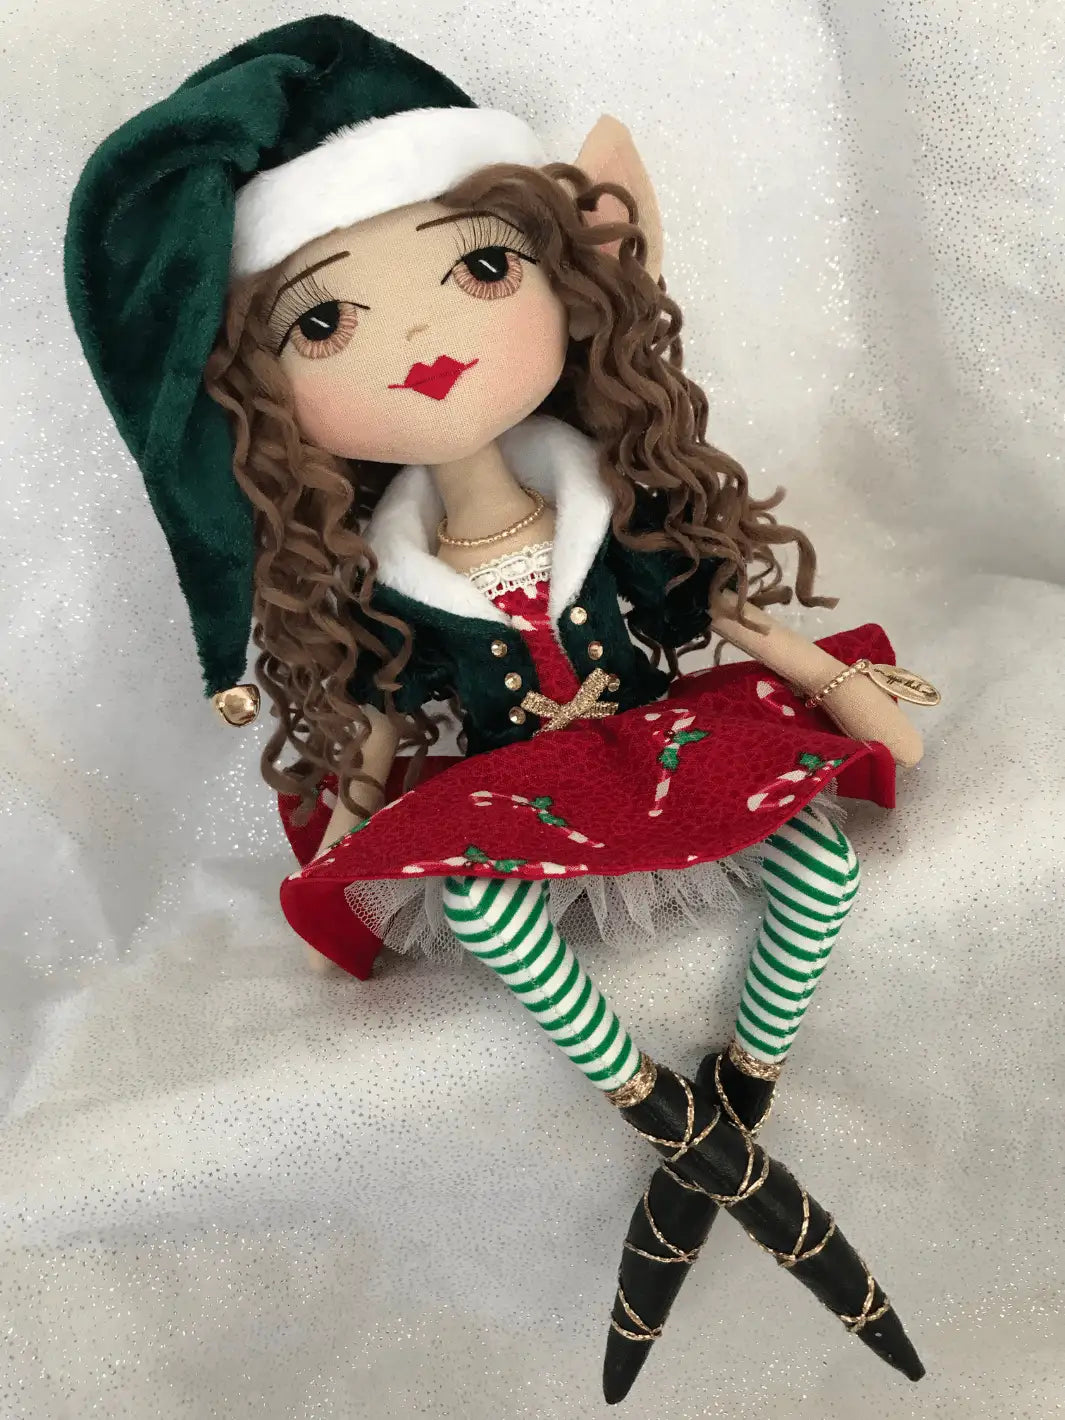 handmade christmas elf doll sitting on a shelf wearing a green velvet jacket with gold detail and a red circle skirt with candy cane design. She has hand embroidered hazel eyes and red lips.